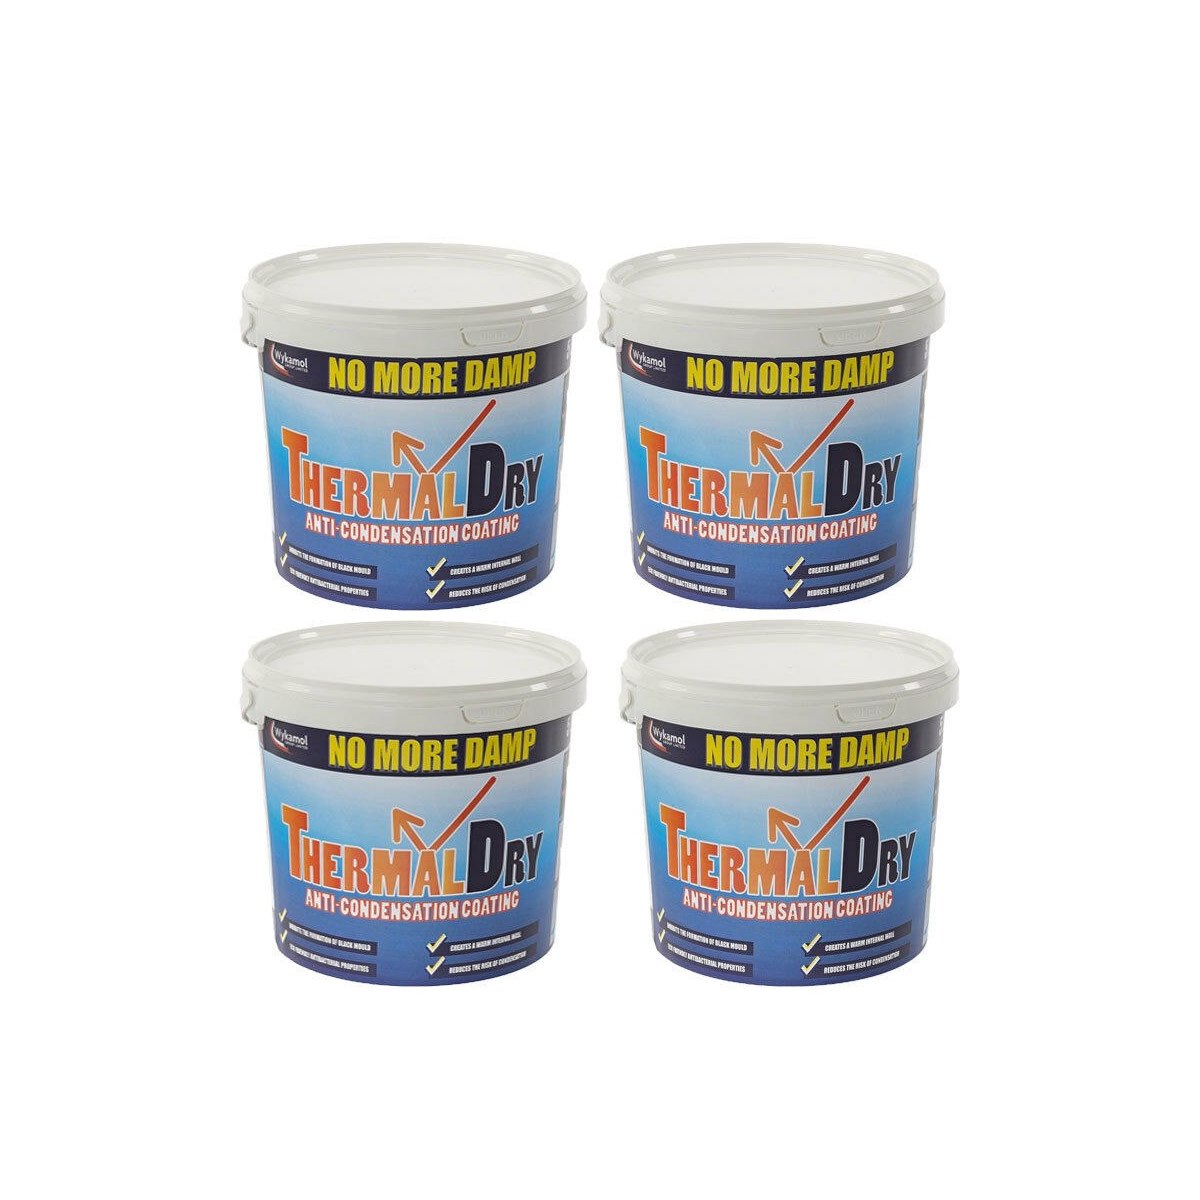 Case of 4 x Wykamol Thermaldry Anti-Condensation Coating Paint White 5 Litre